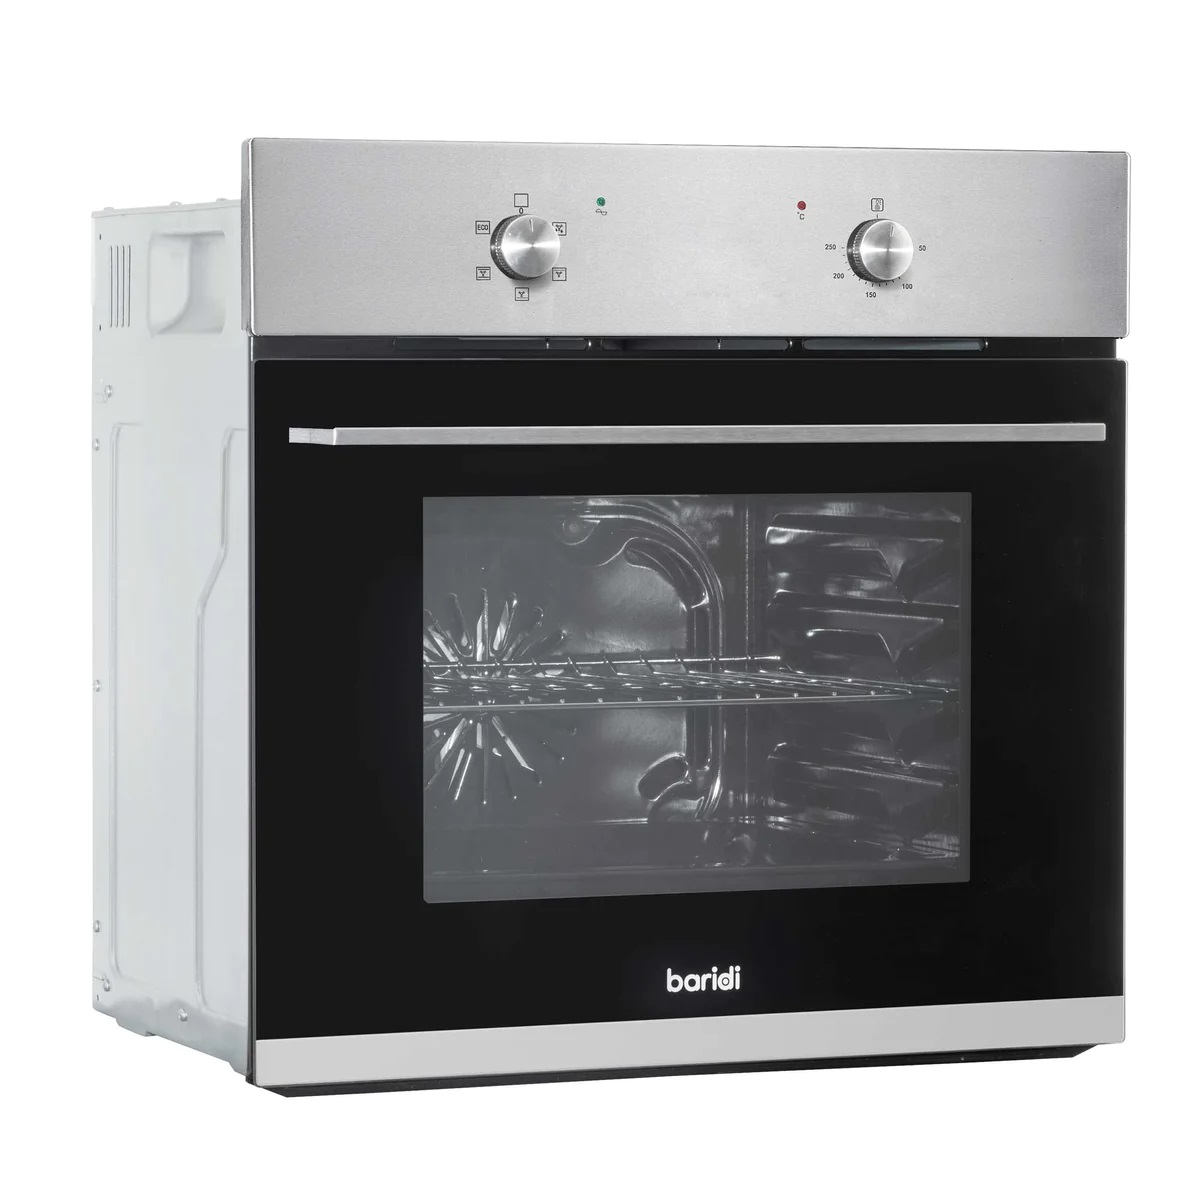 C51EIX, 24″ Single Electric Wall Oven with Turbo True European Convection